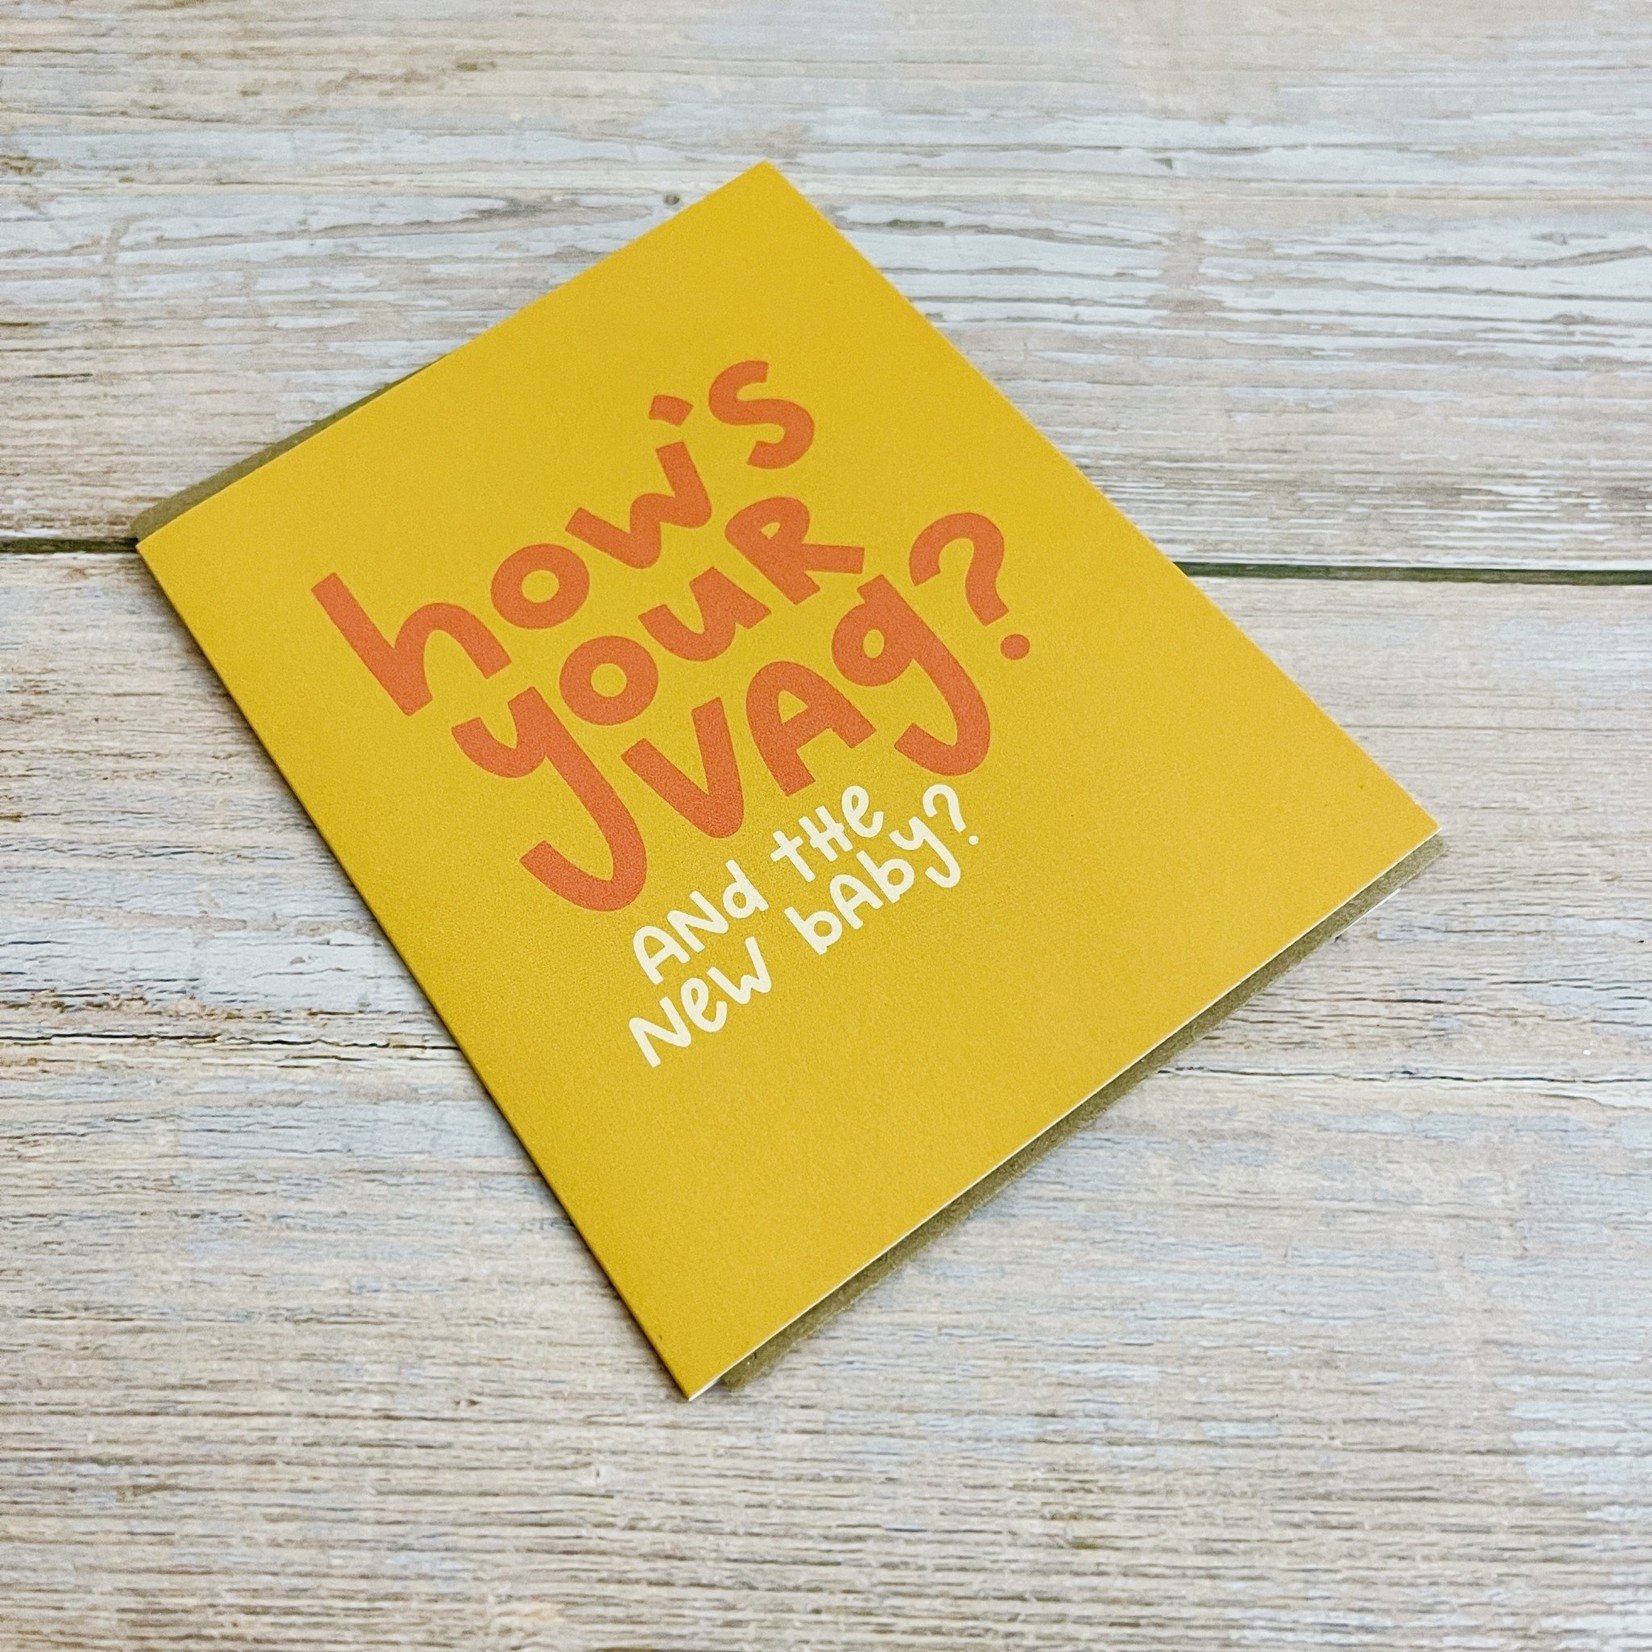 Twentysome Design Hows Your Vag? New Baby Card